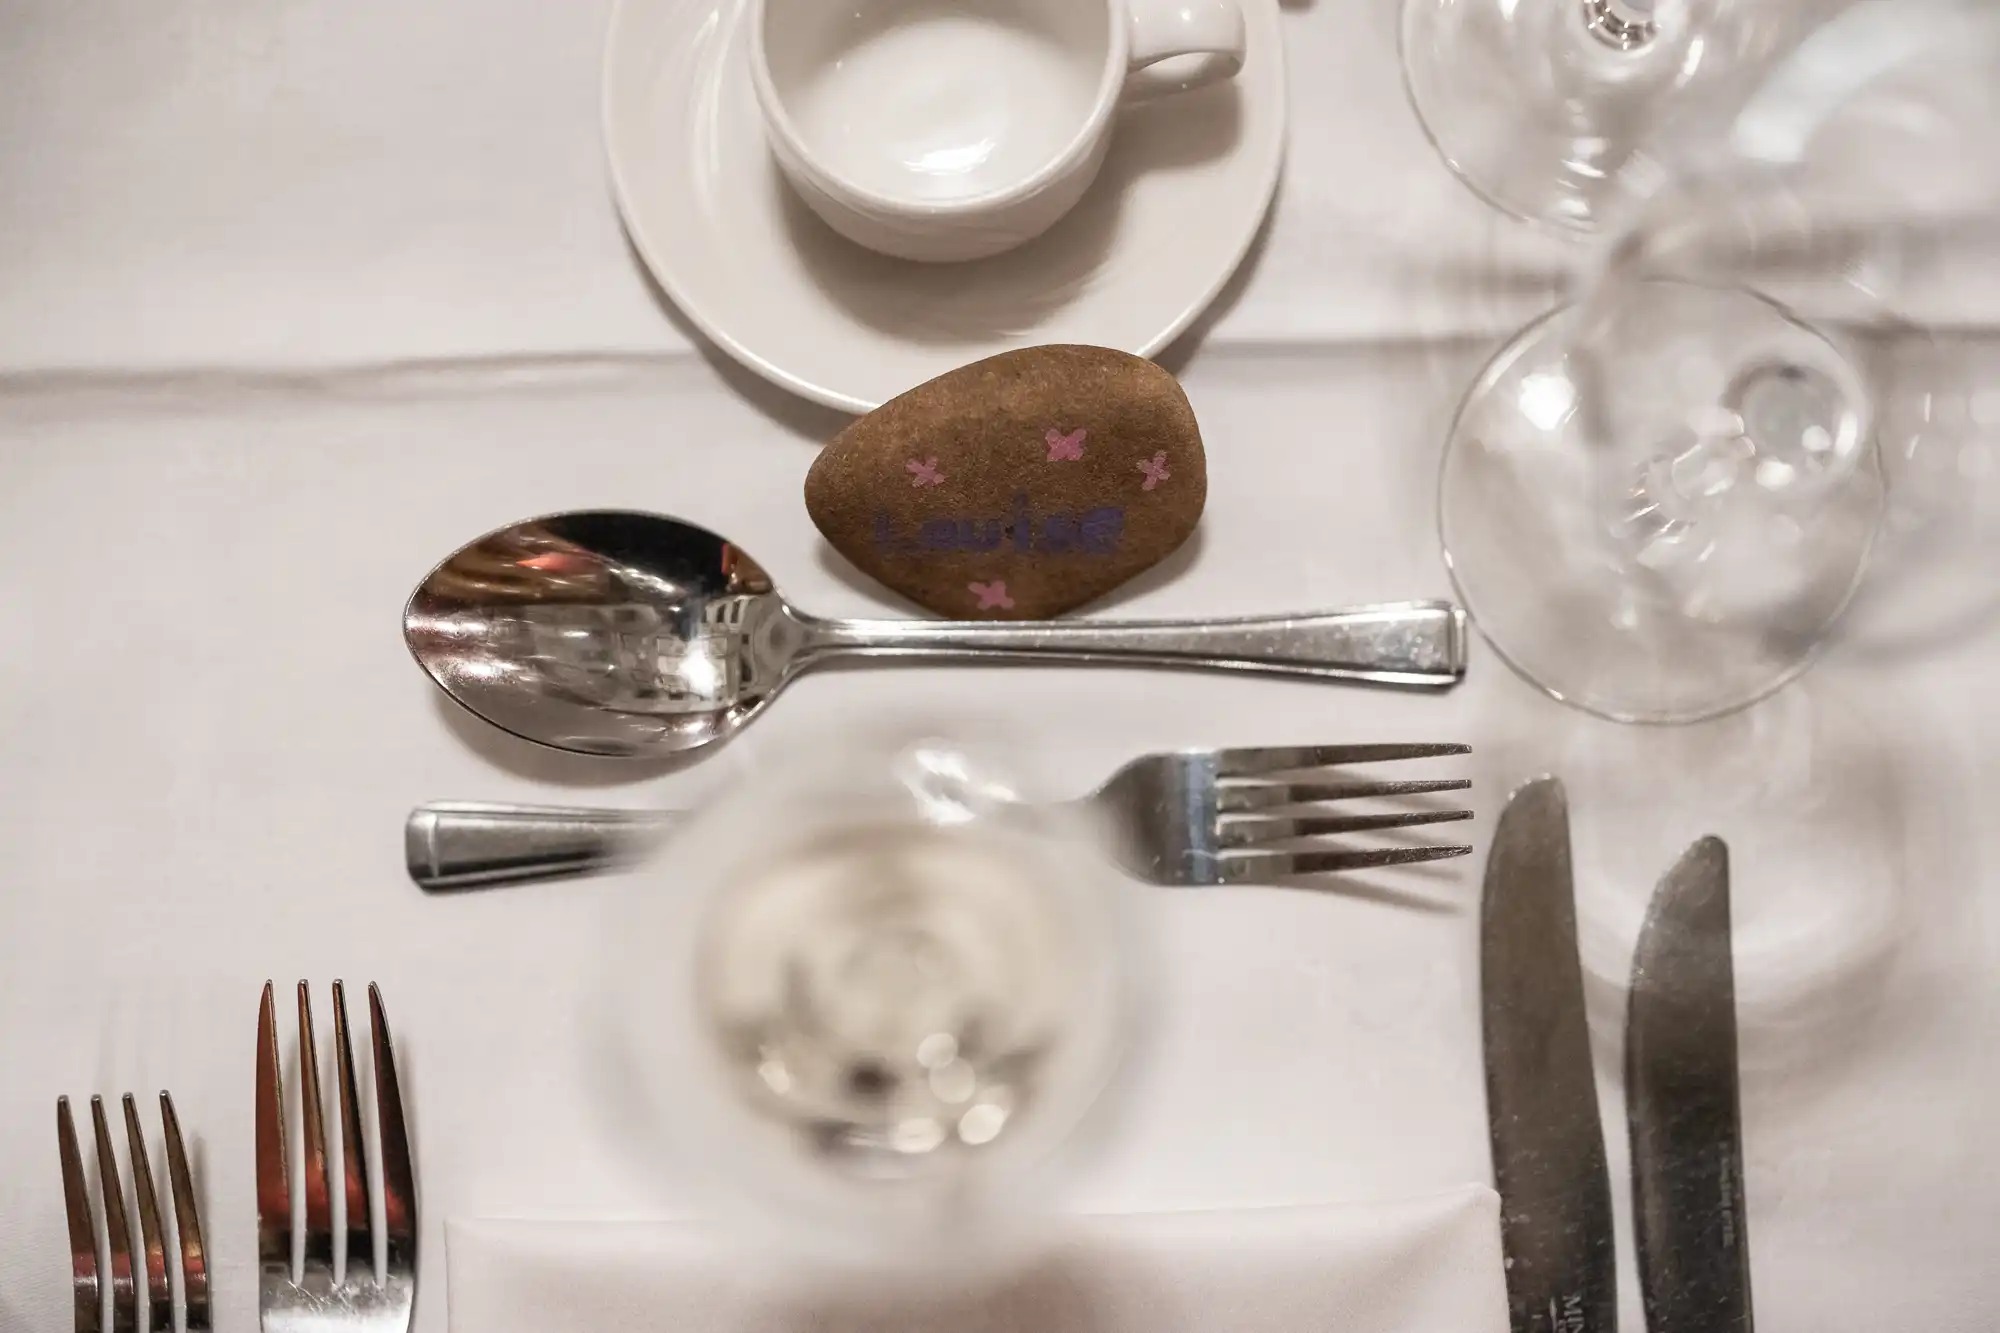 Table setting with plates, glasses, silverware, a cup on a saucer, and a stone with purple markings and text on a white tablecloth.